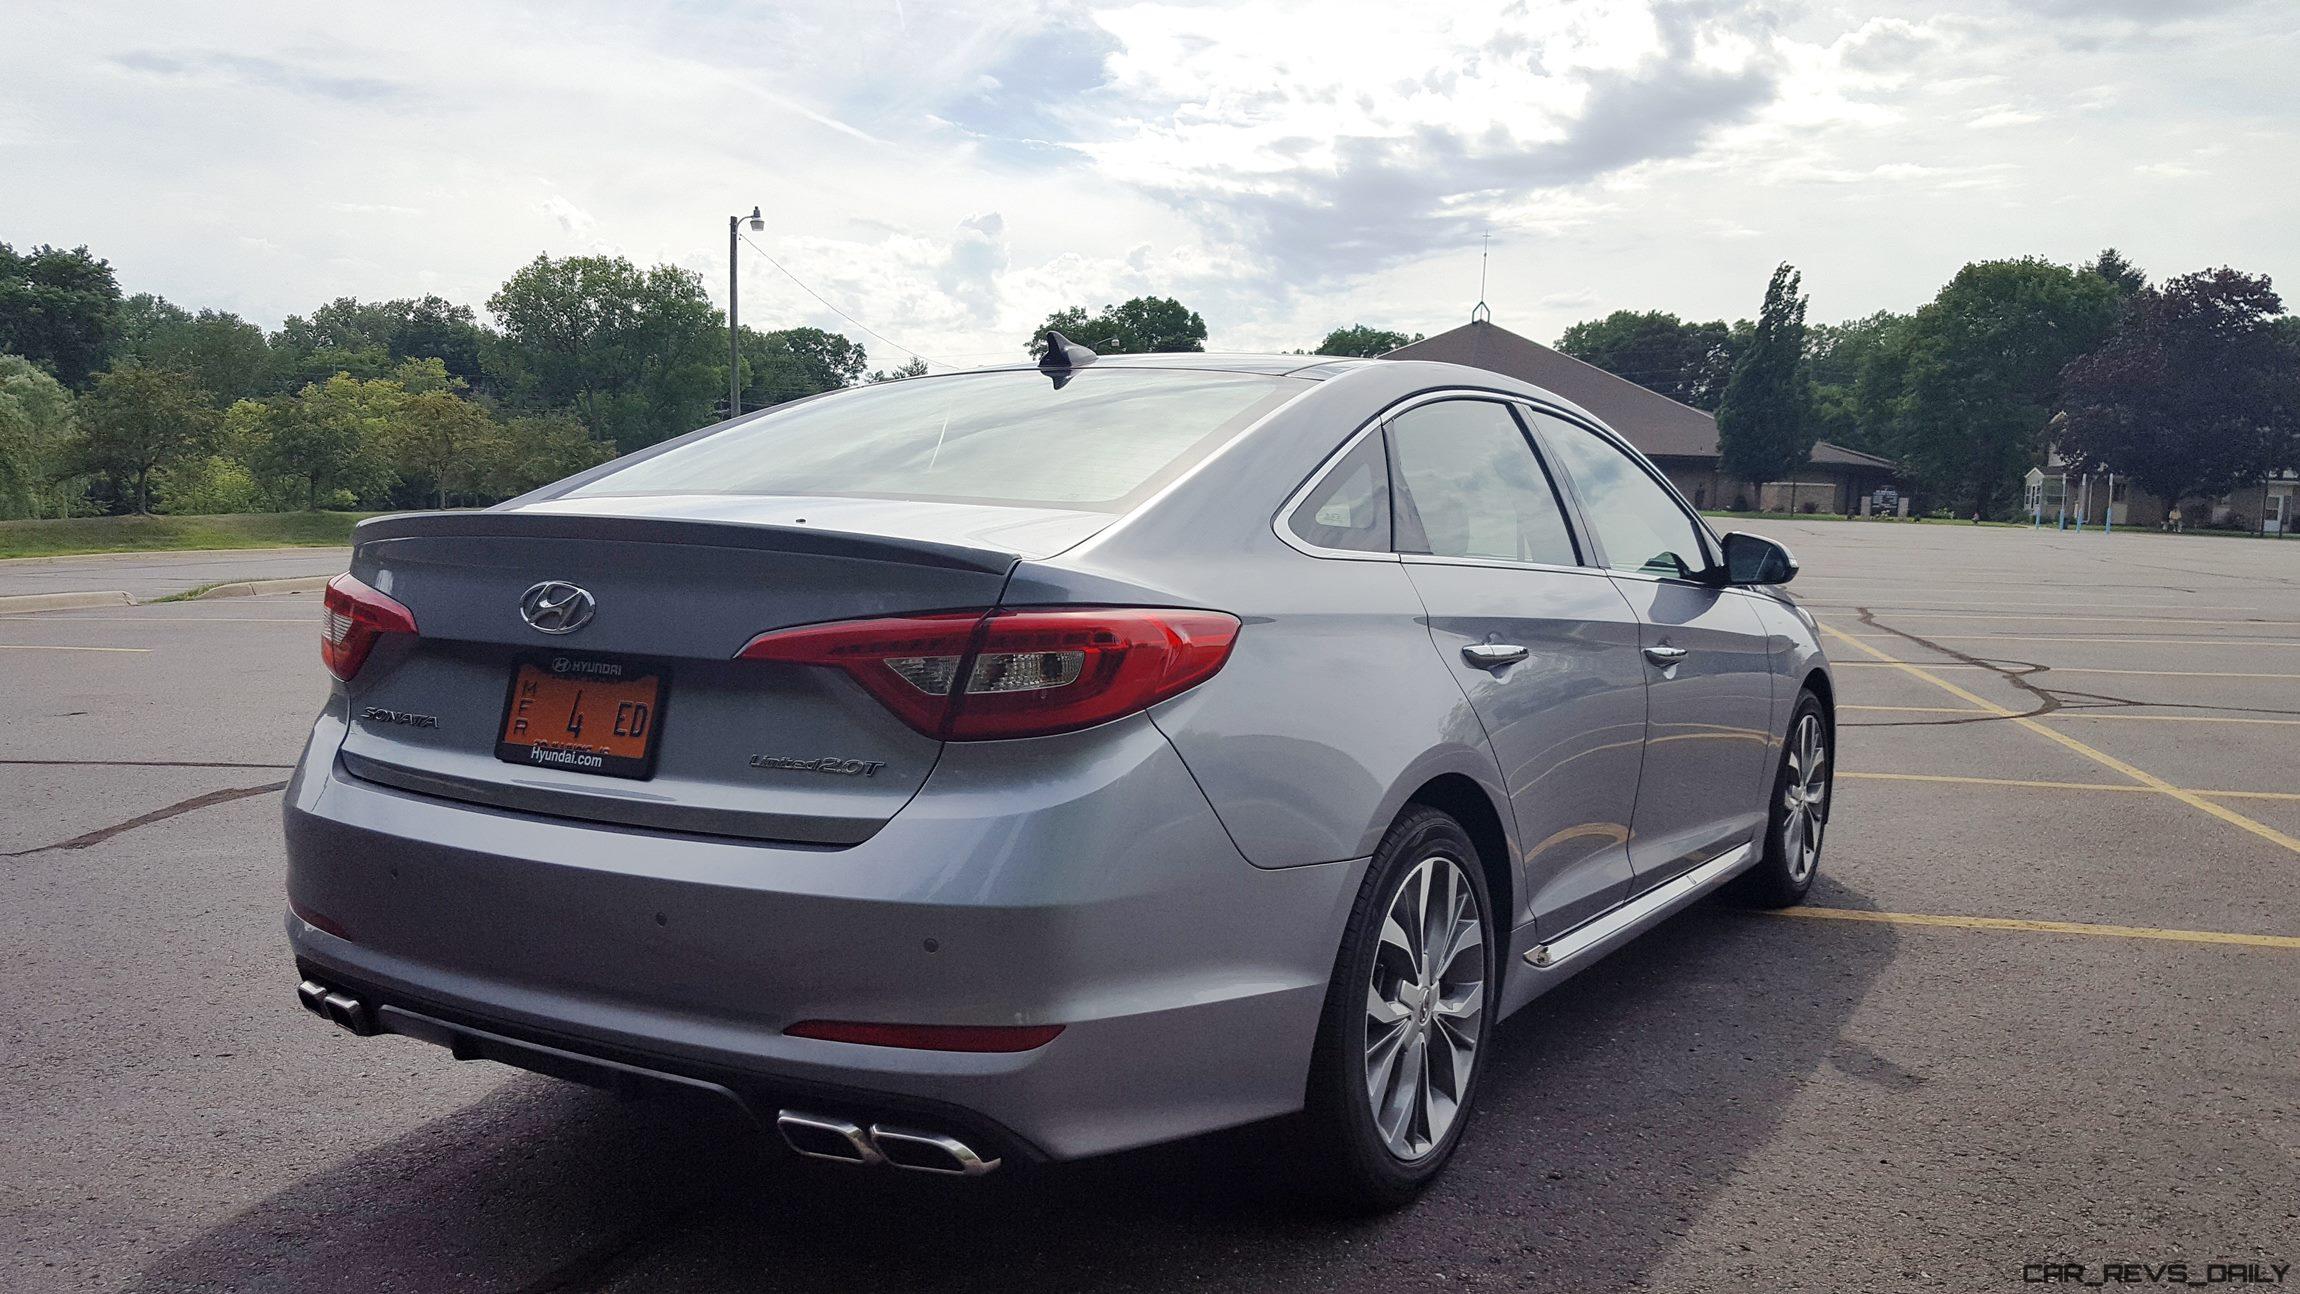 Road Test Review 2016 Hyundai Sonata 2.0T Limited By